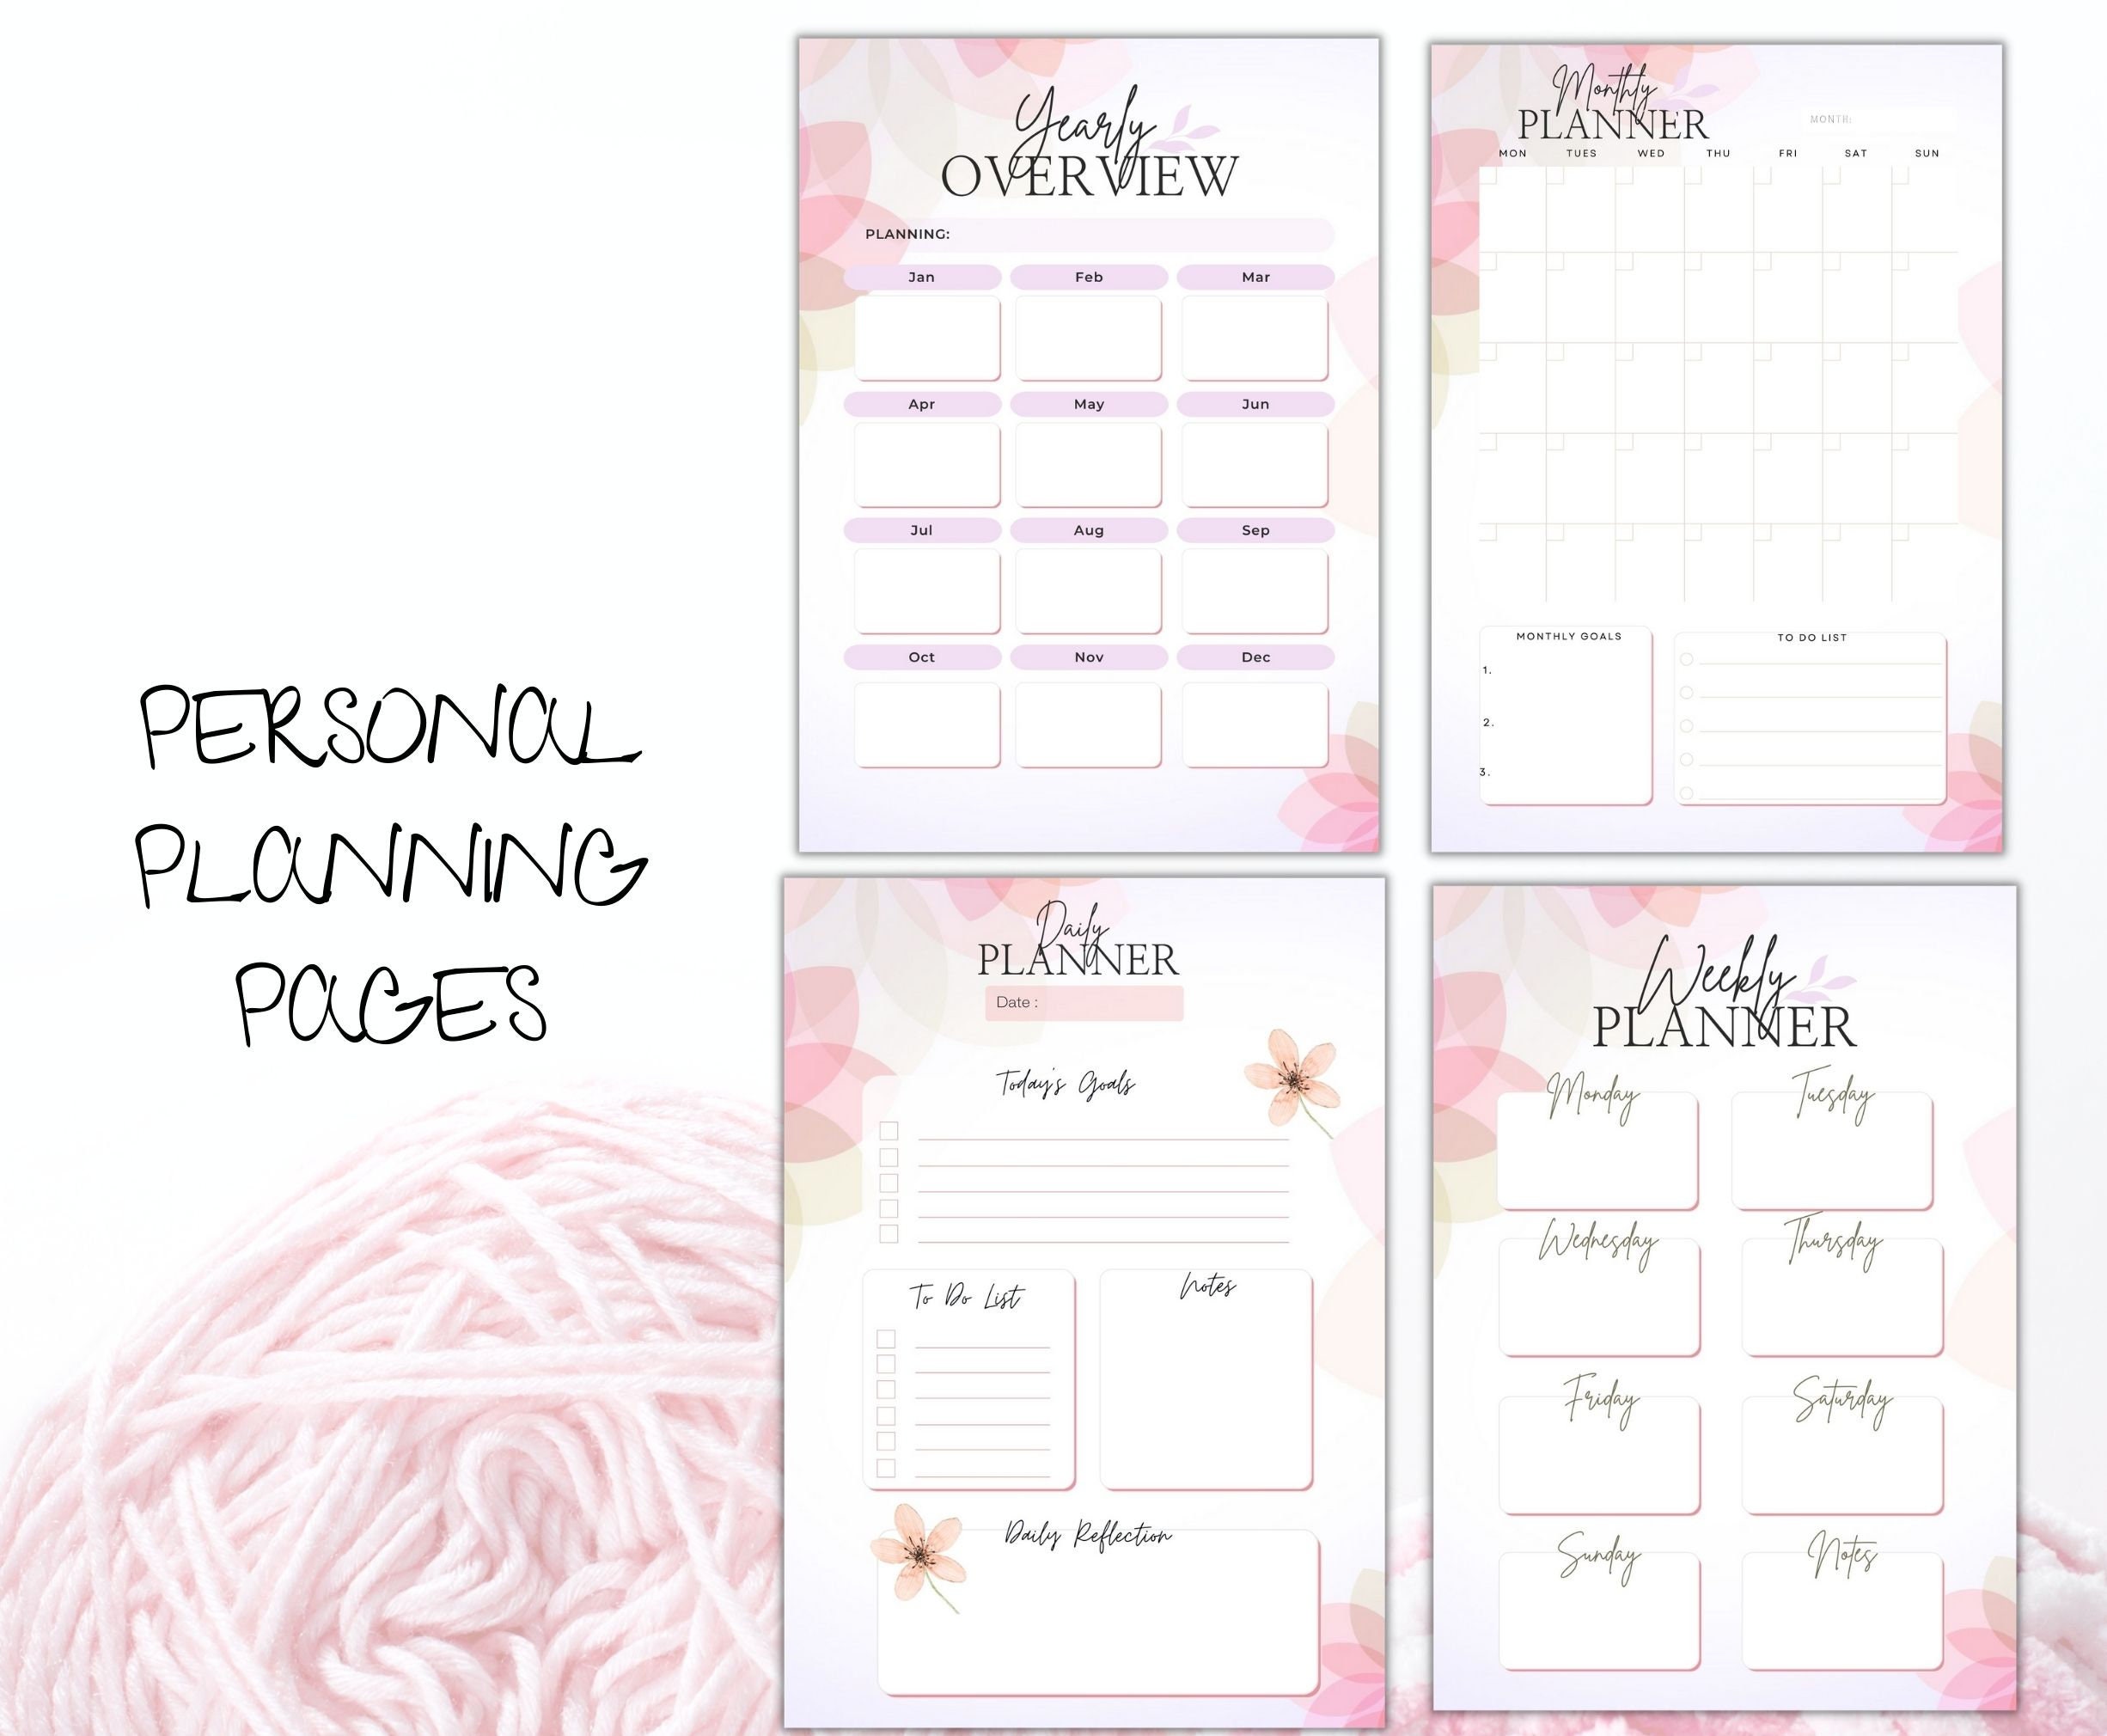 The Ultimate FREE Printable Crochet Planner YOU NEED - Today!